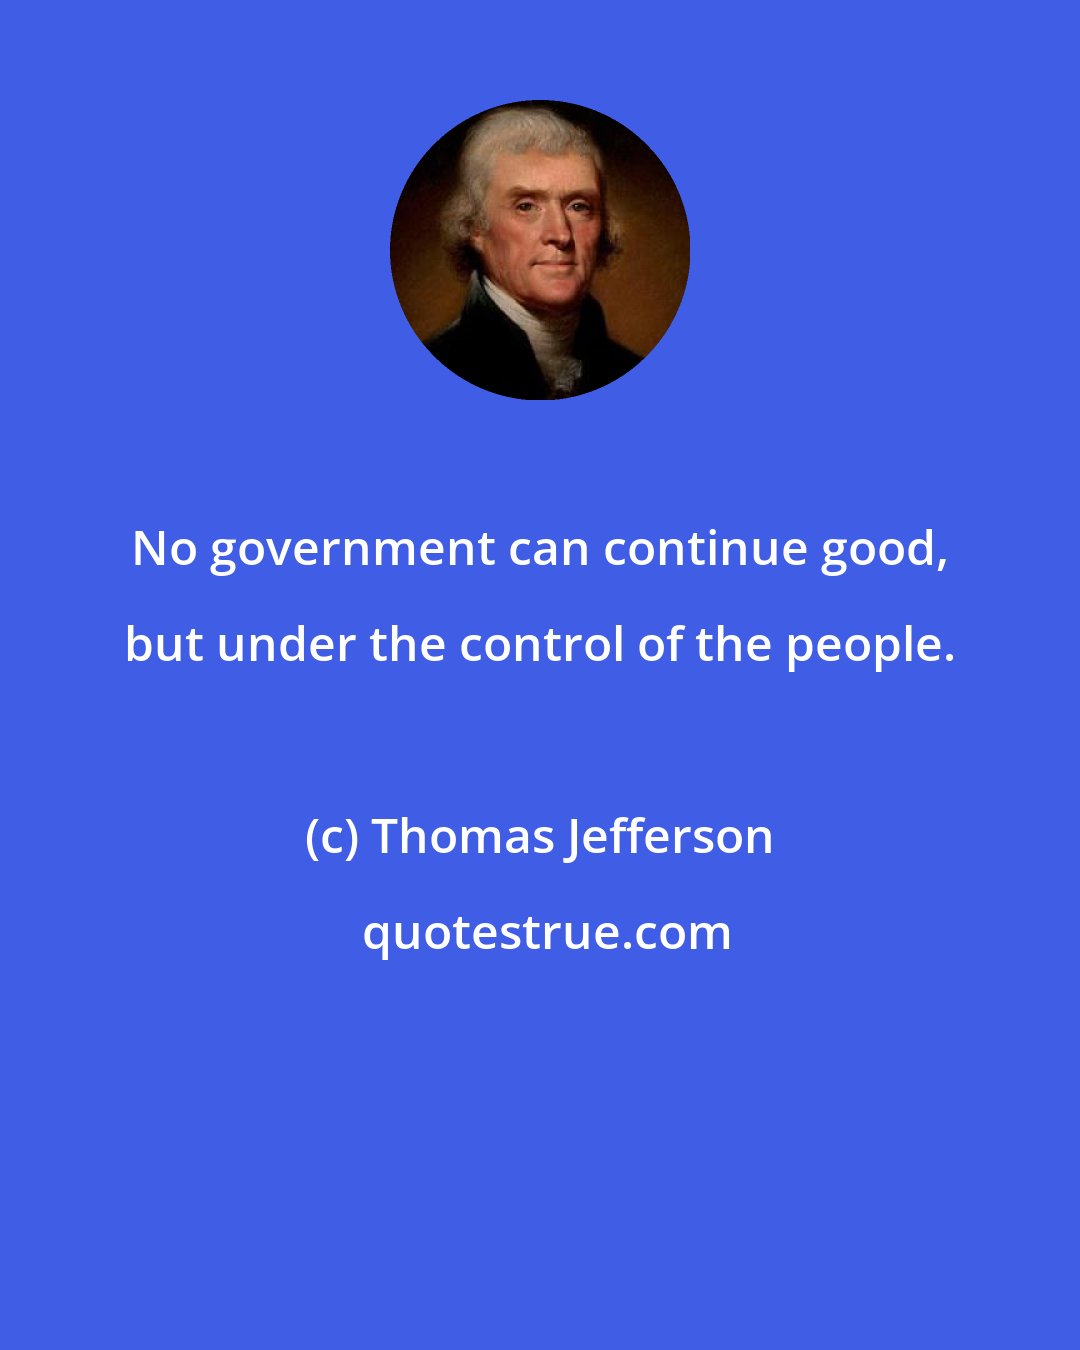 Thomas Jefferson: No government can continue good, but under the control of the people.